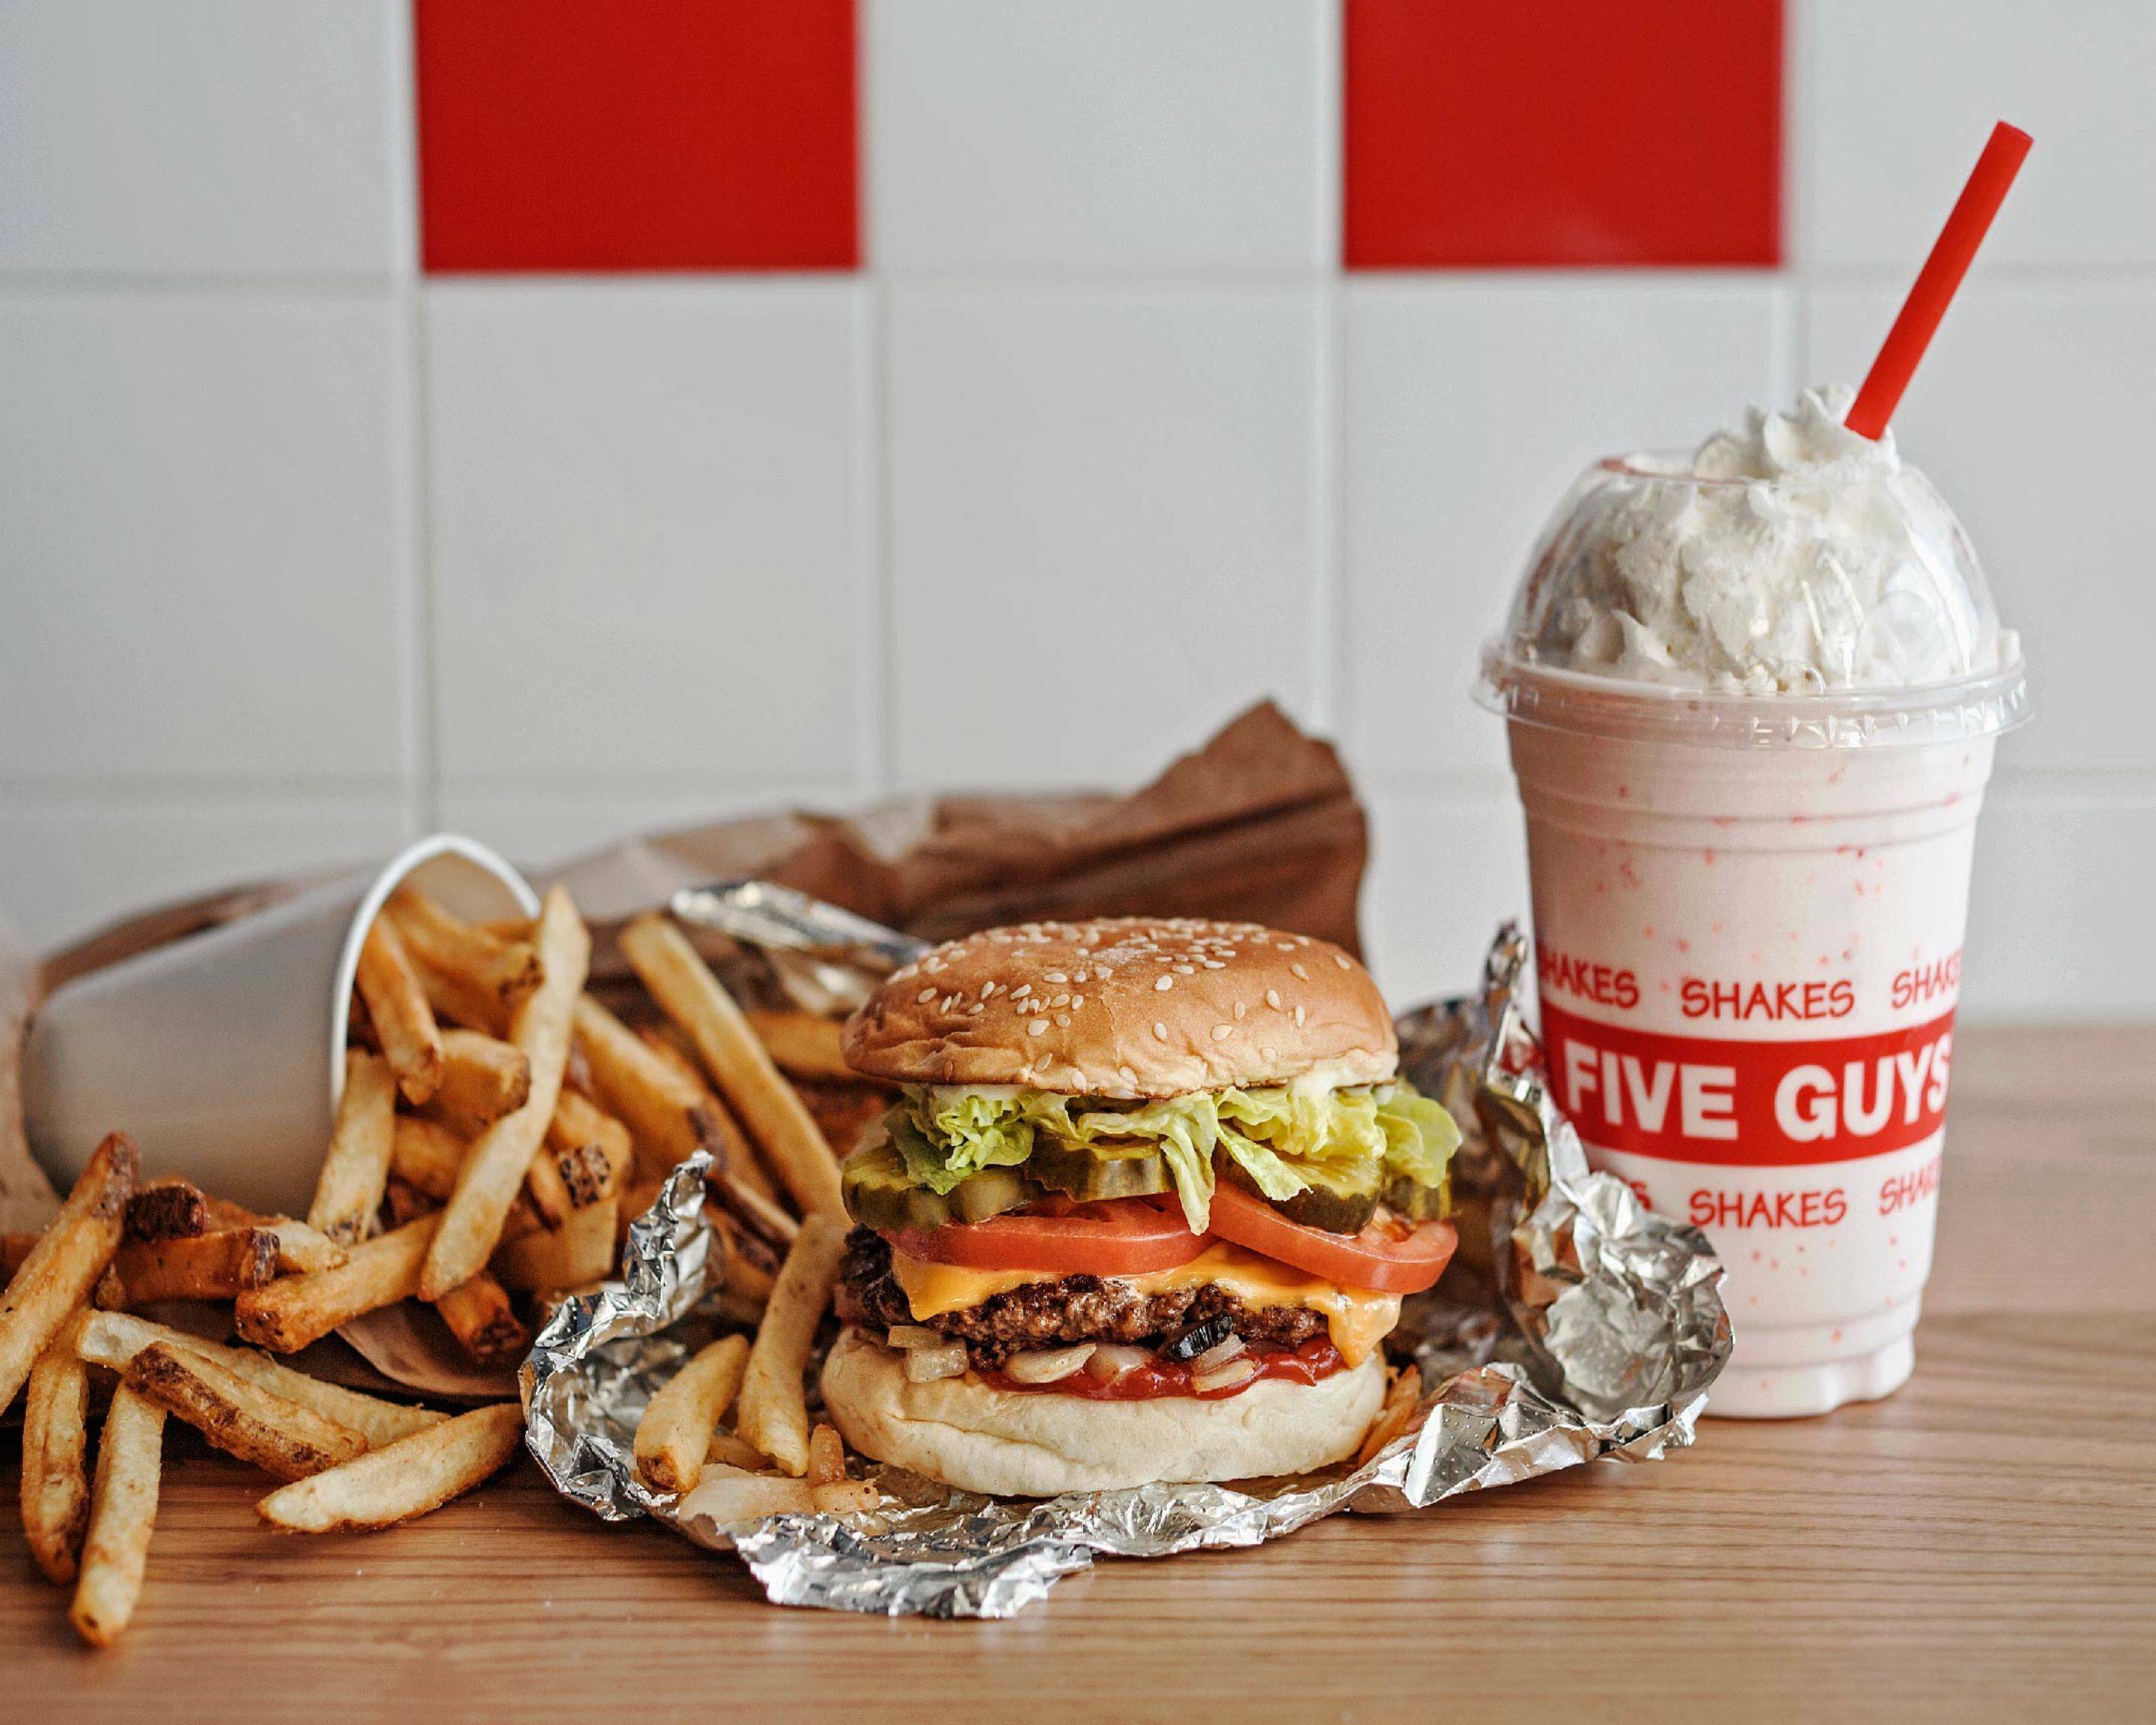 Five Guys has opened their first Central Sydney outlet